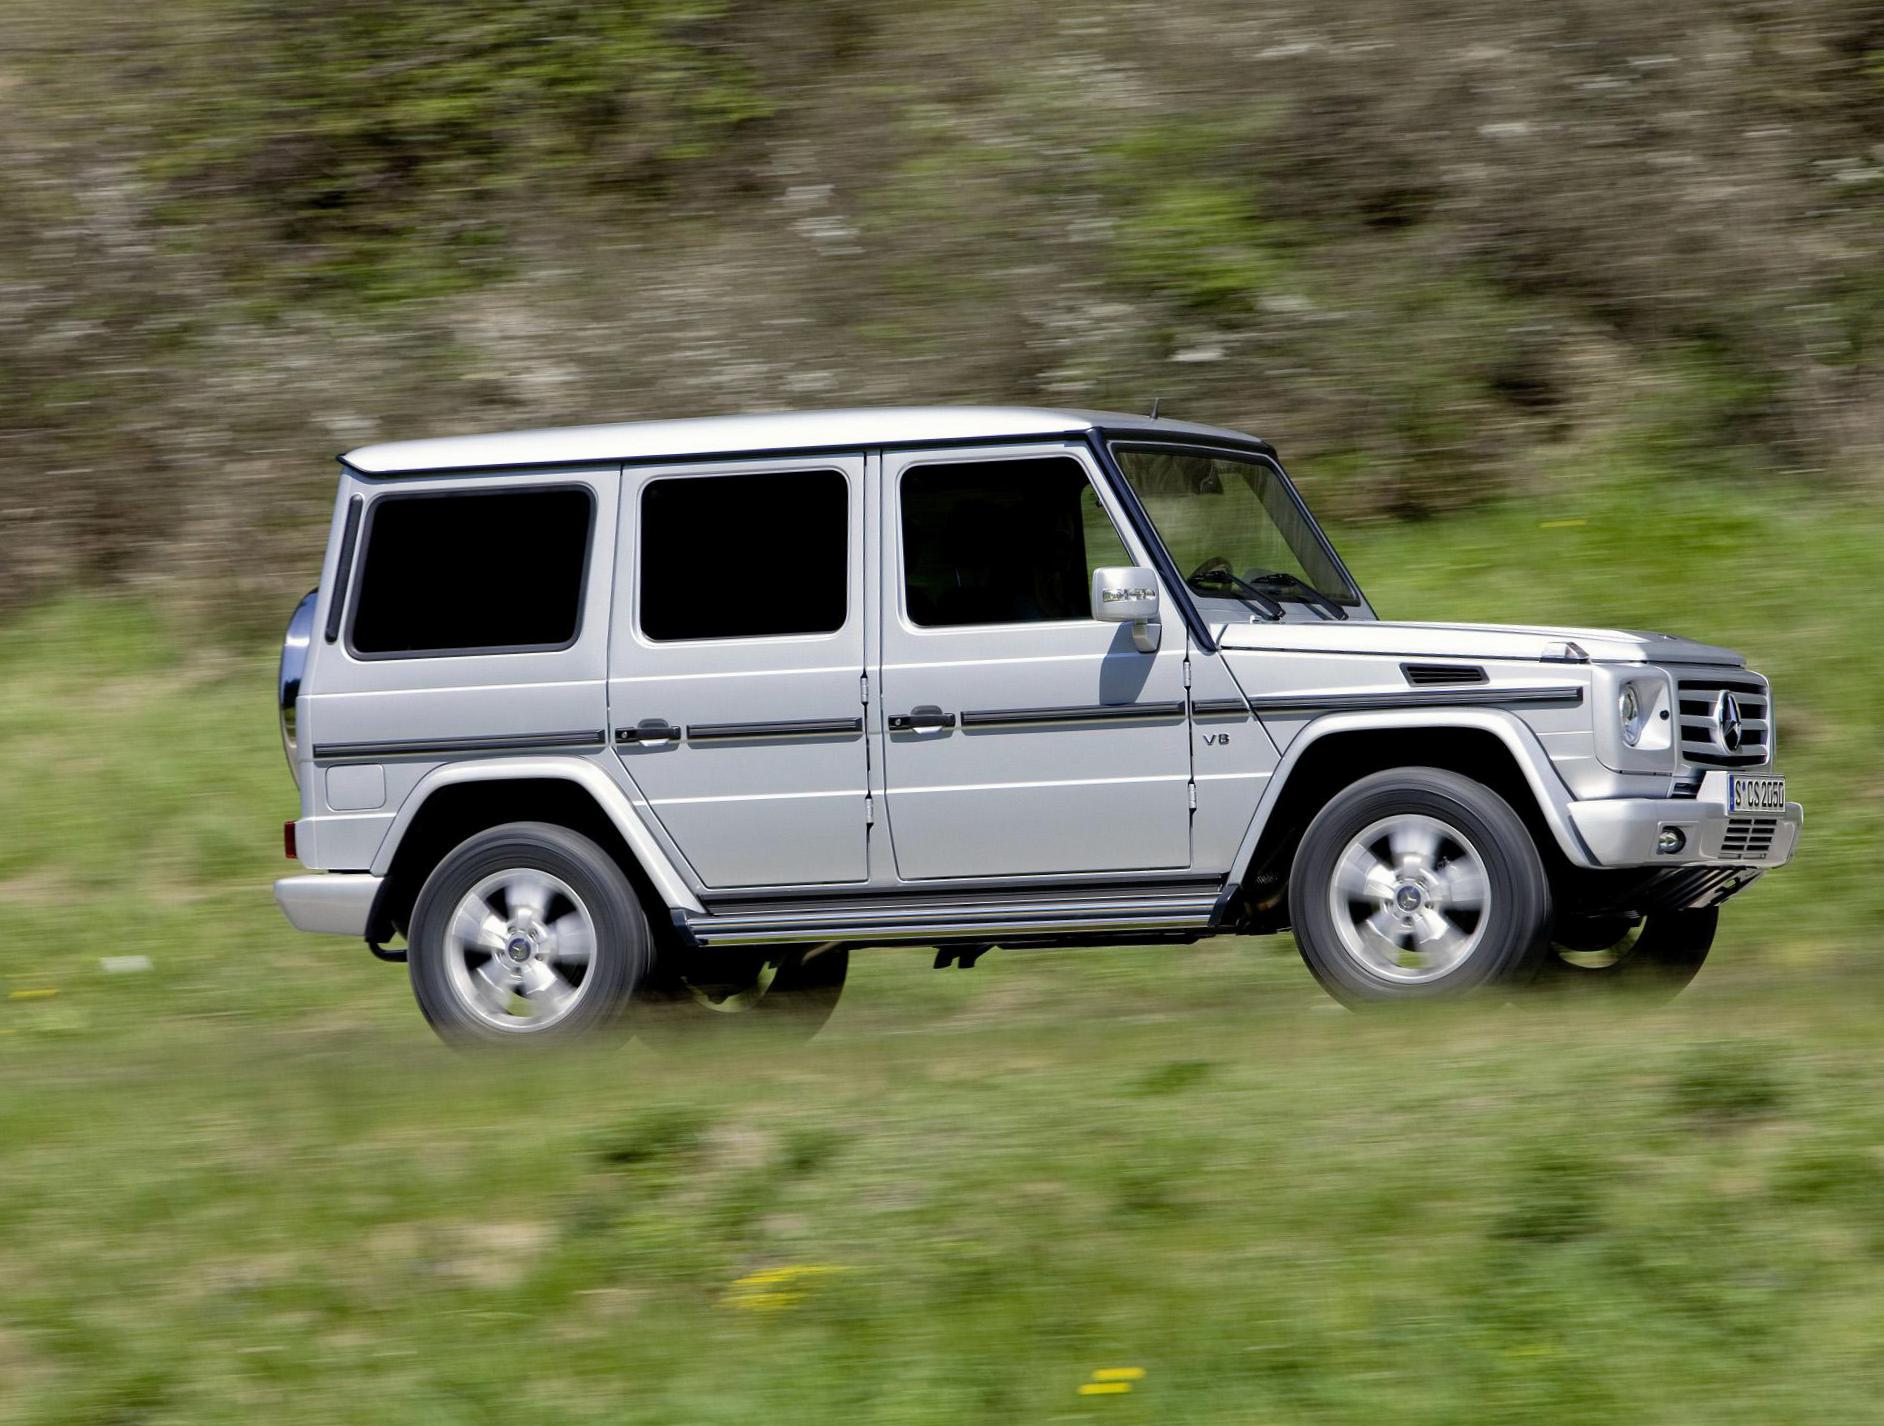 G-Class (W463) Mercedes model coupe